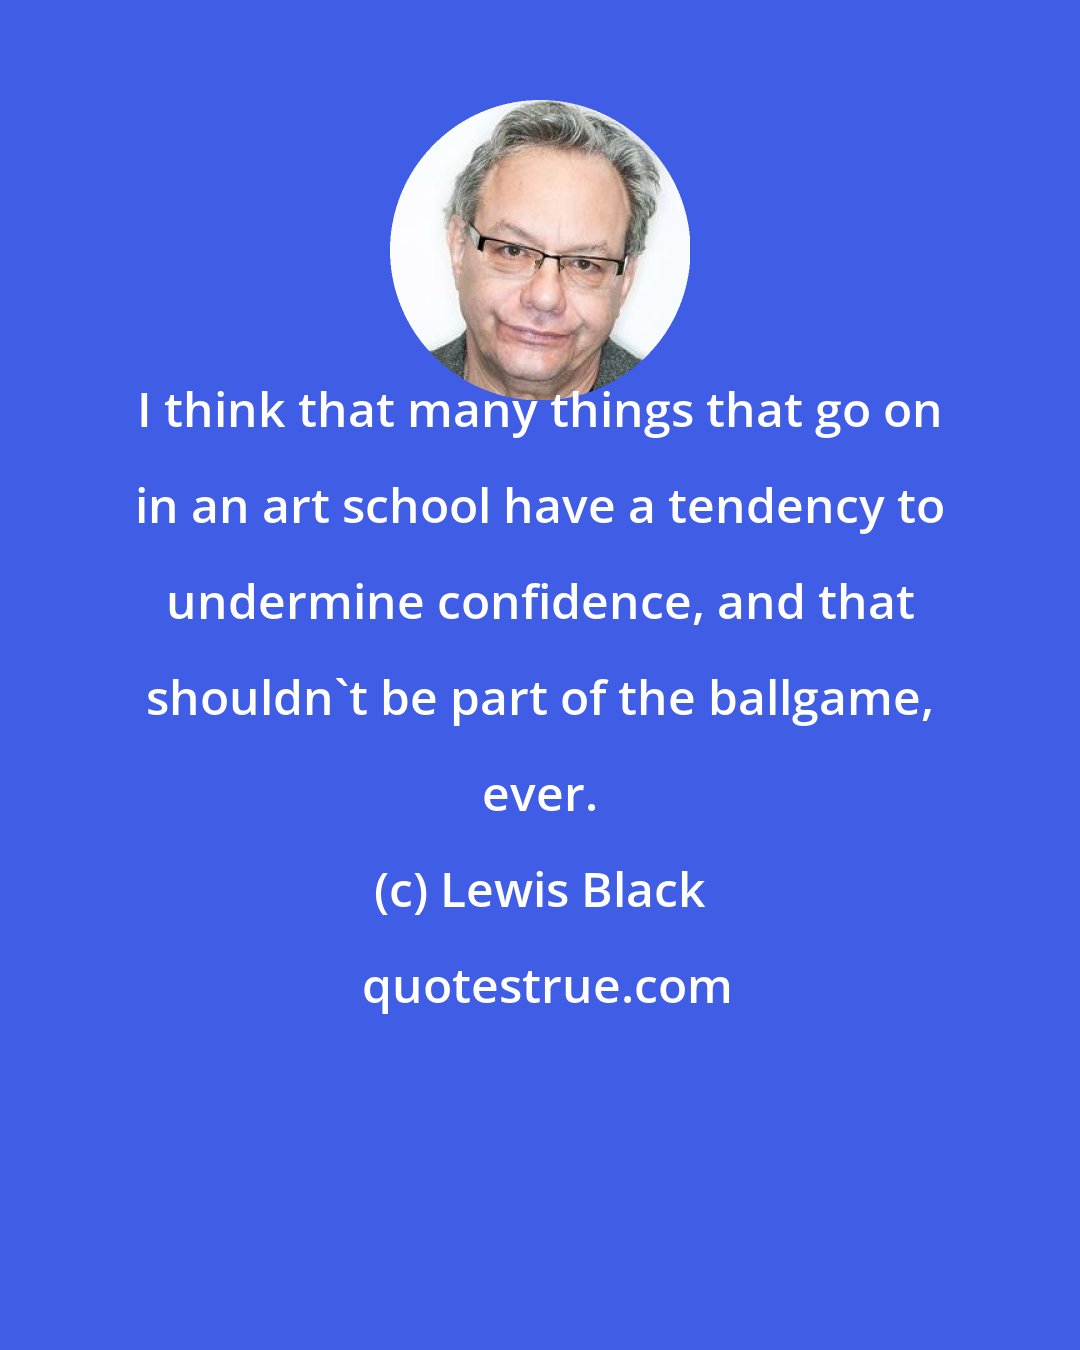 Lewis Black: I think that many things that go on in an art school have a tendency to undermine confidence, and that shouldn't be part of the ballgame, ever.